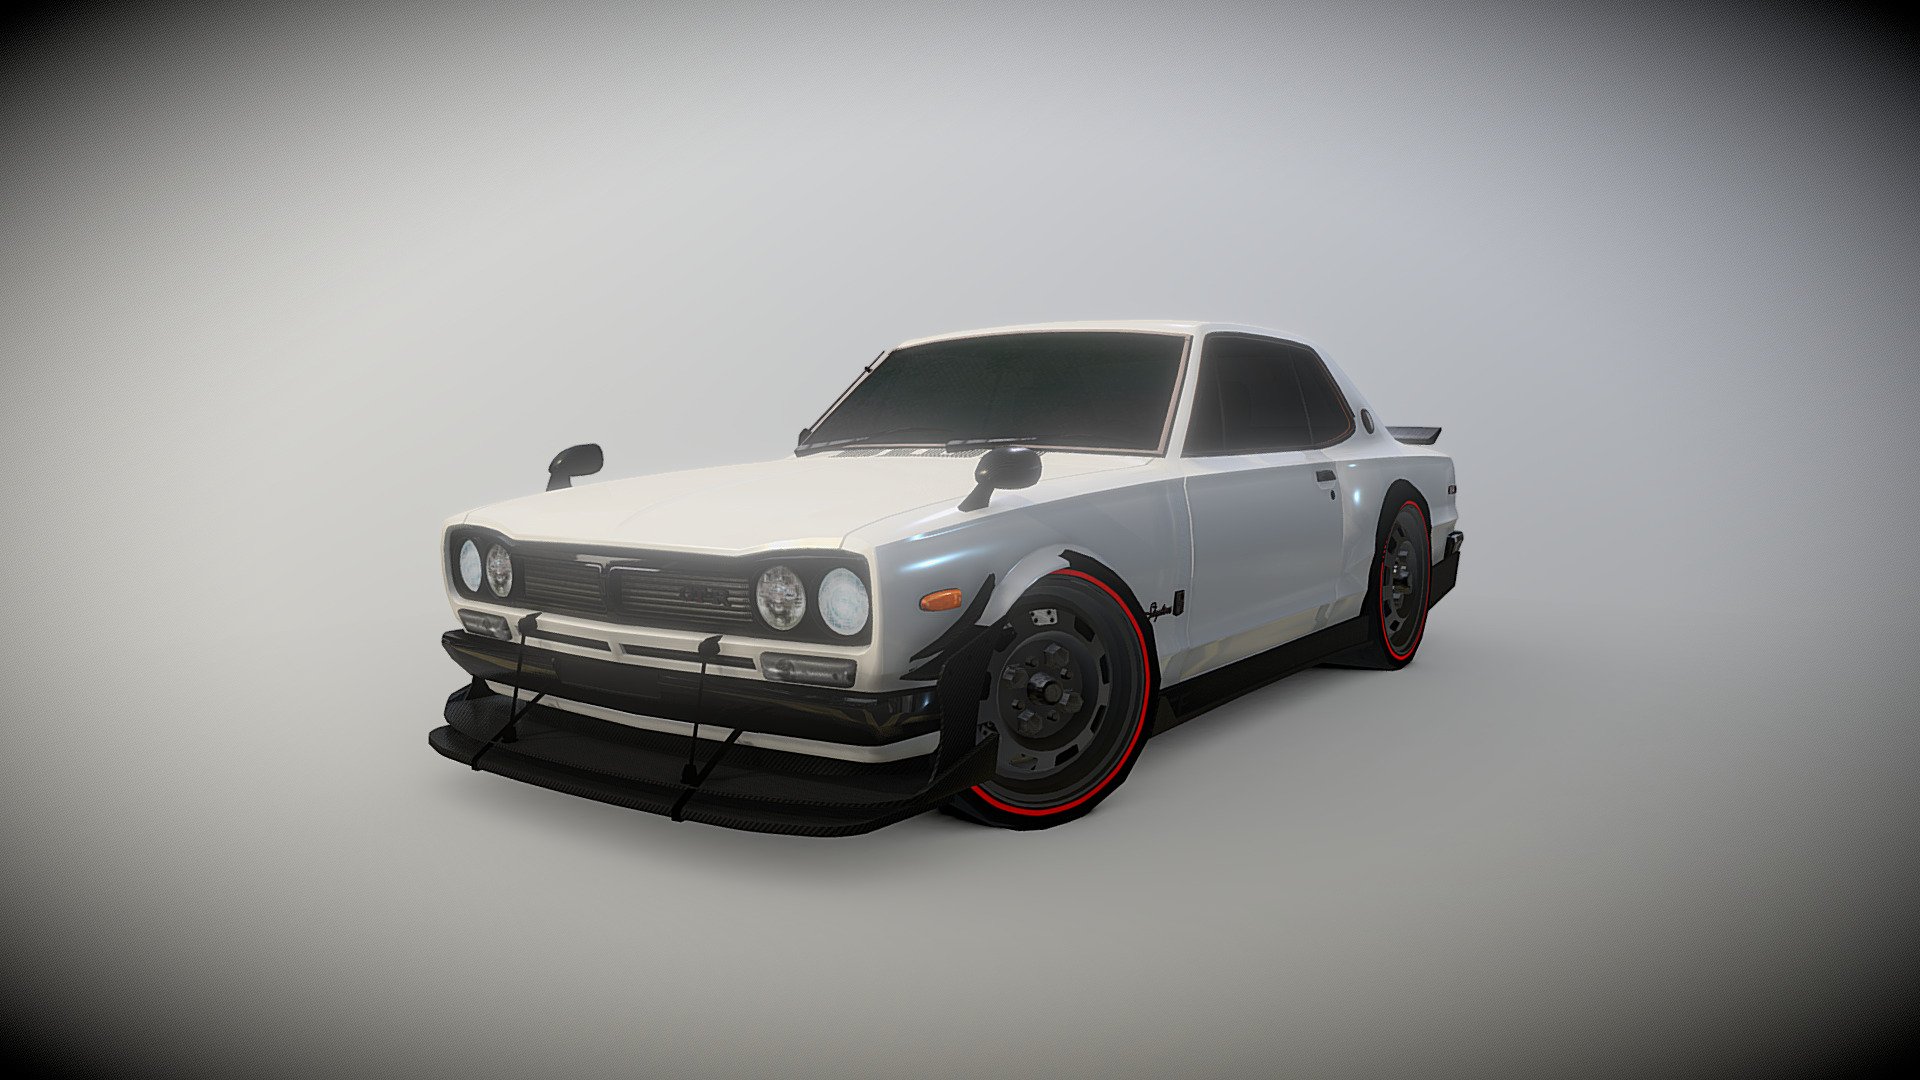 Another model made for VR/AR
Dont Ask for free downloads, it will never happen! - Nissan Skyline GTR Hadosuka - 3D model by OGL (@GaryLim) 3d model